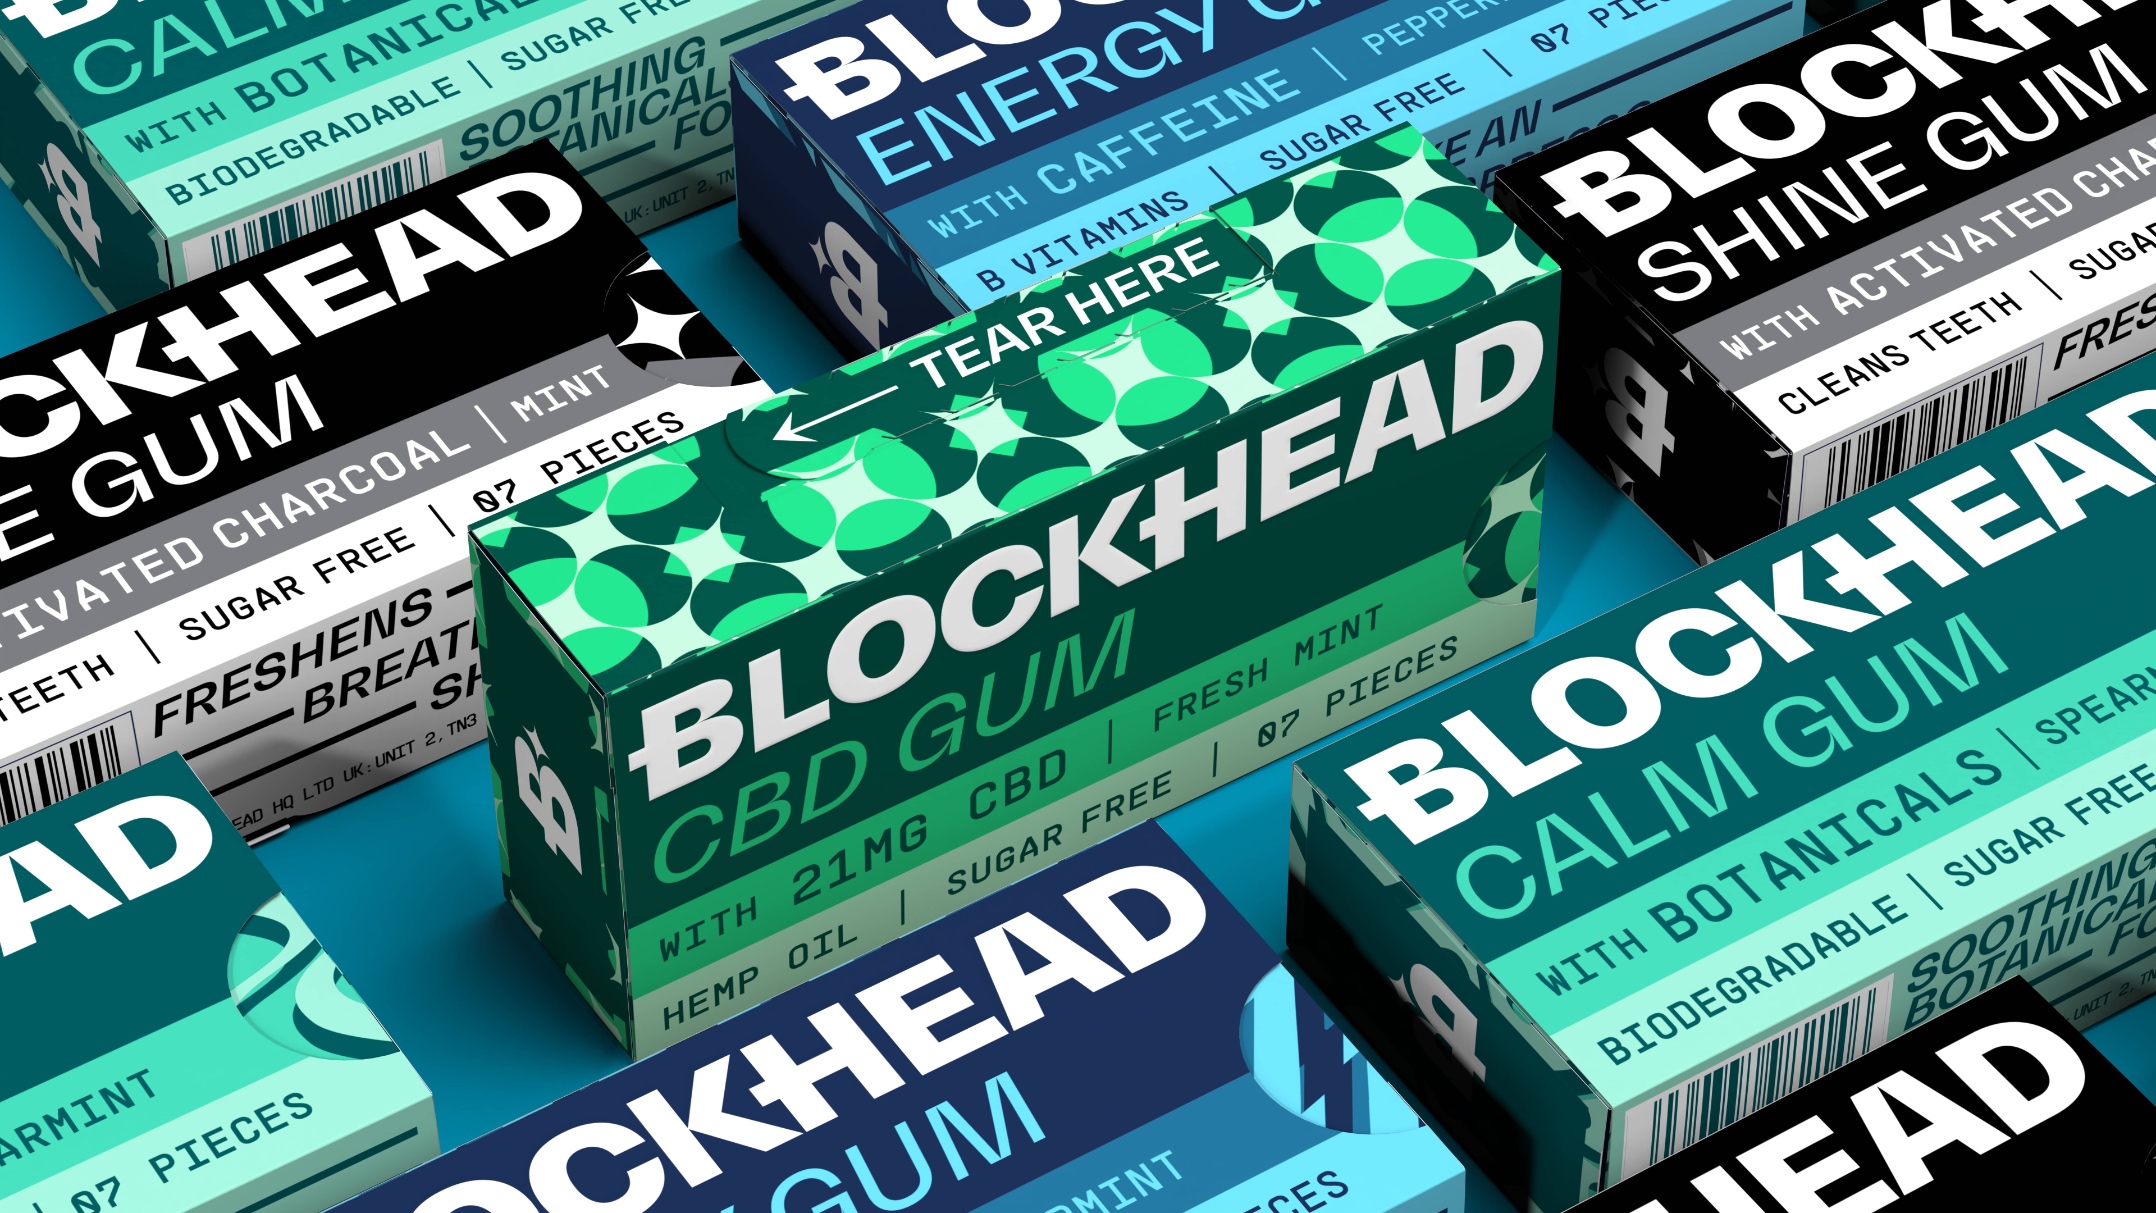 Blockhead Gum Structural Redesign and Brand Refresh